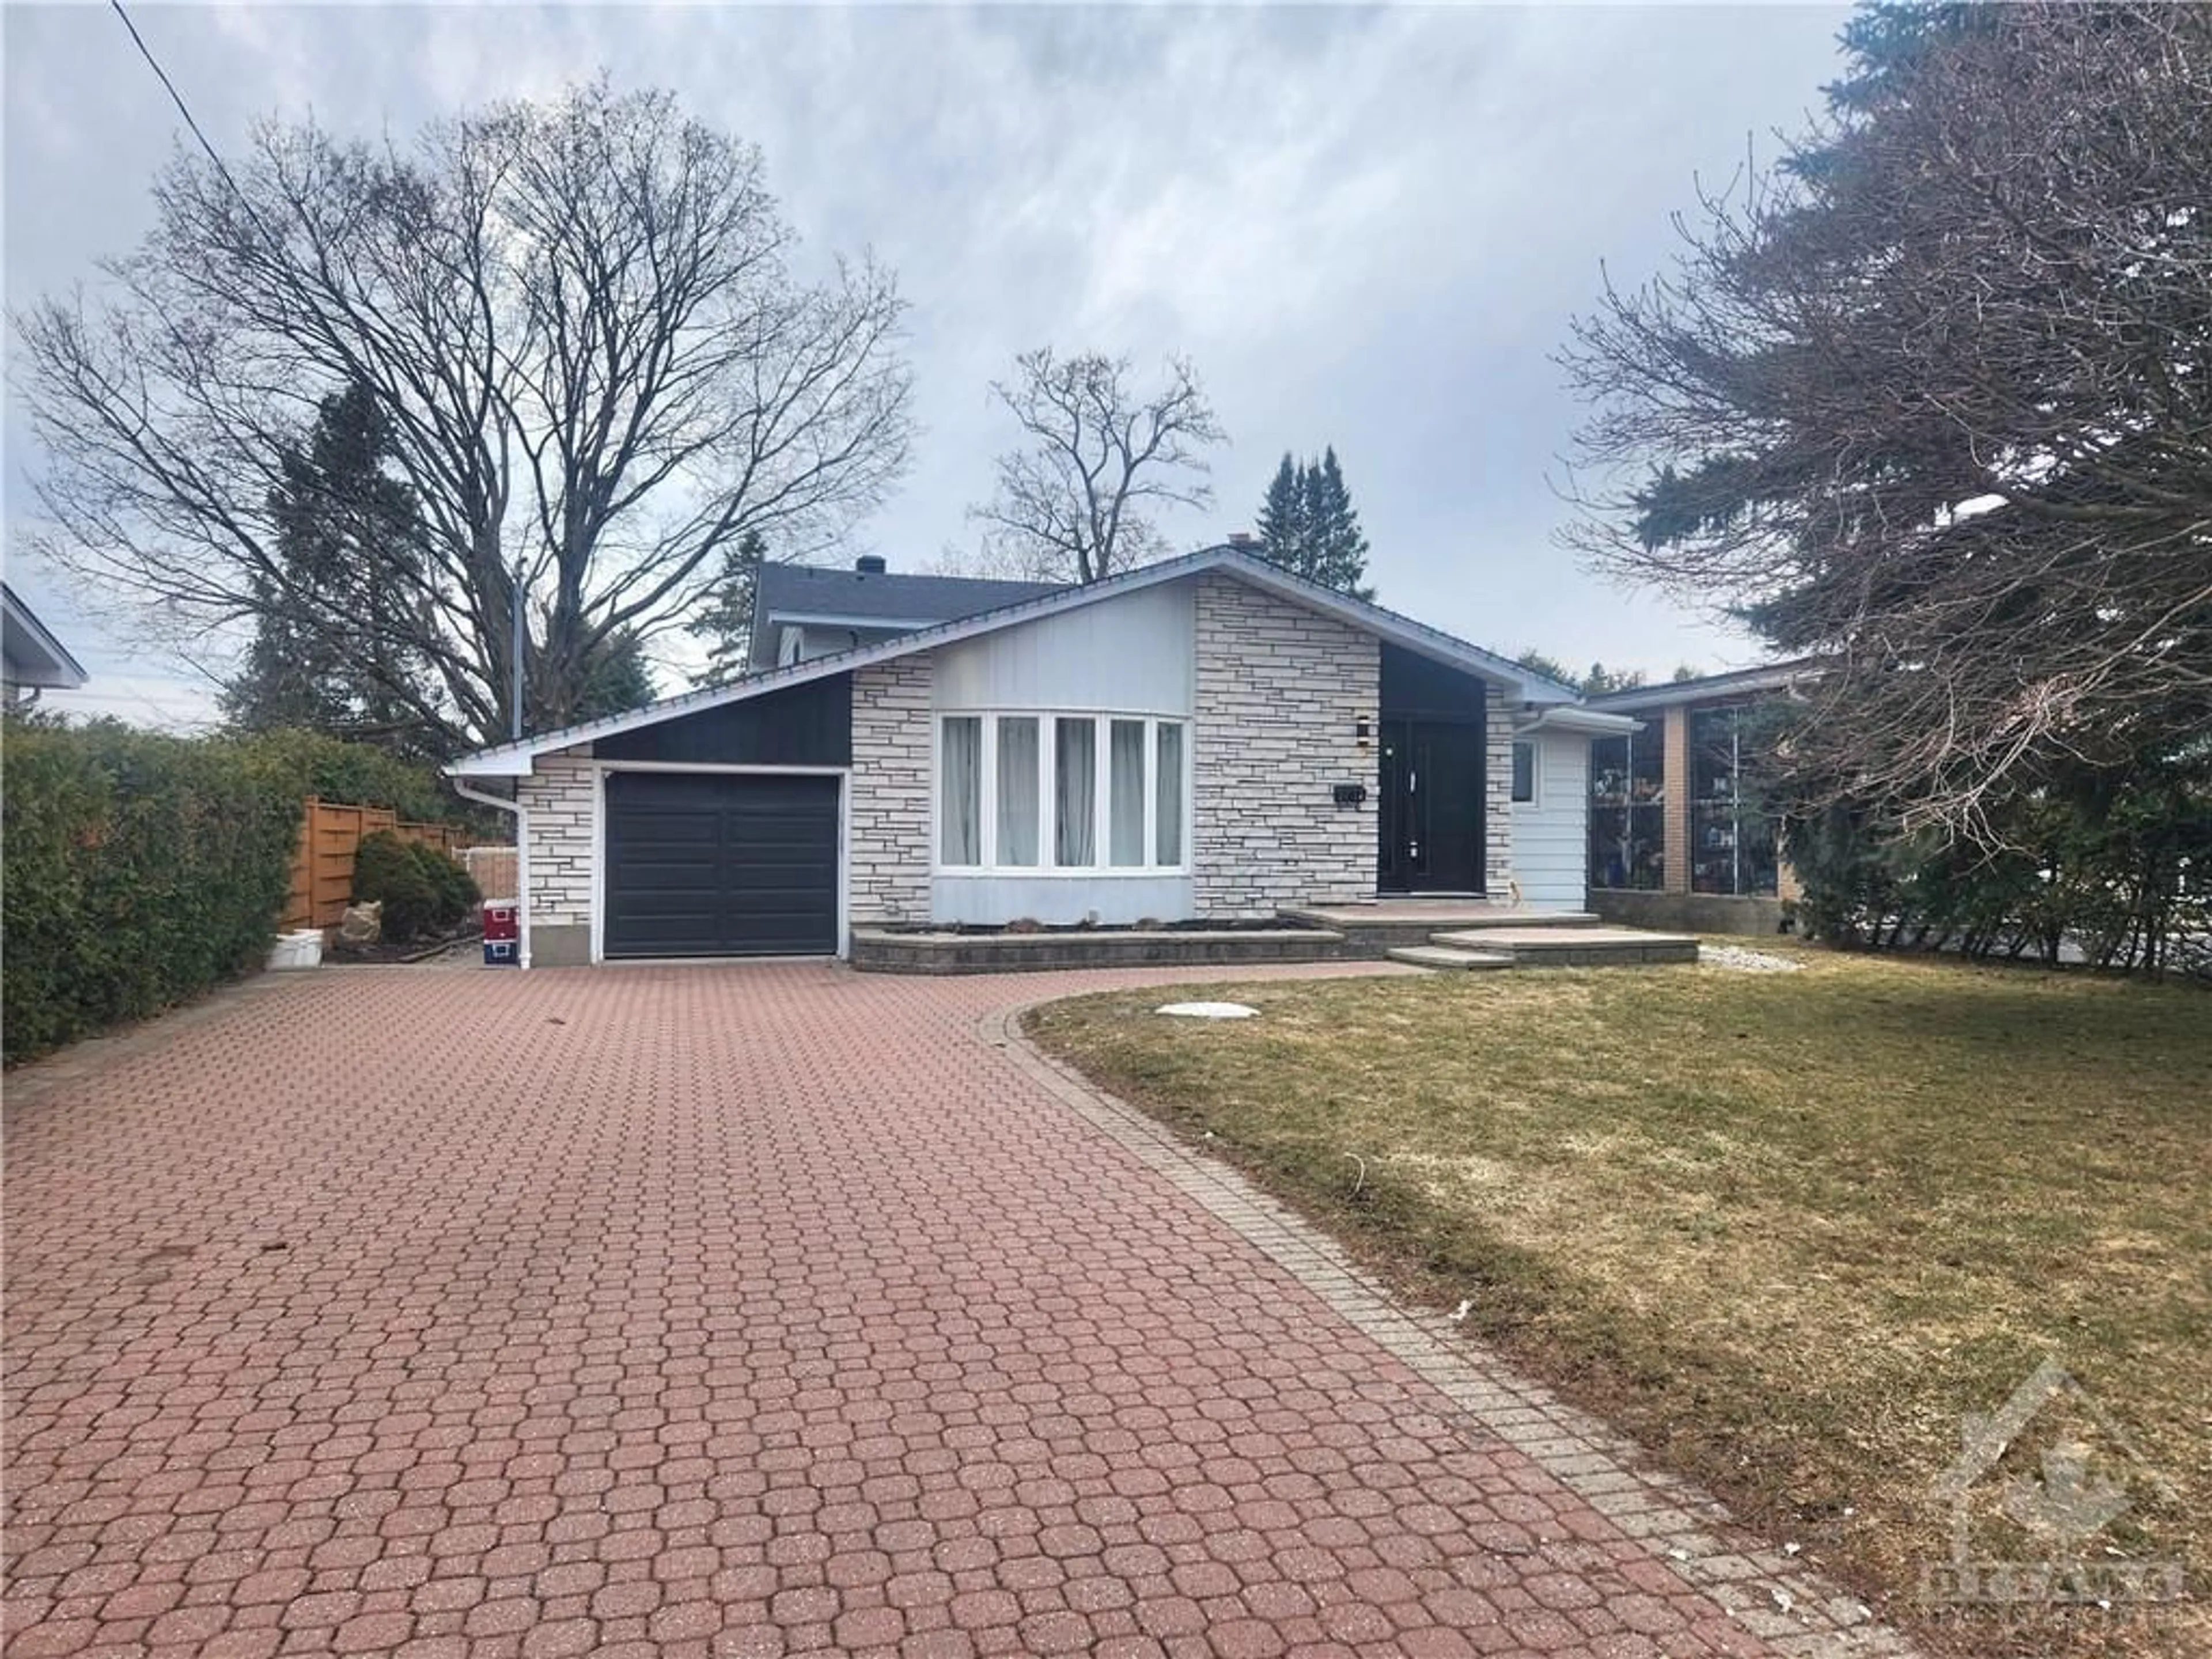 Home with brick exterior material for 2114 BALHARRIE Ave, Ottawa Ontario K1G 1G5